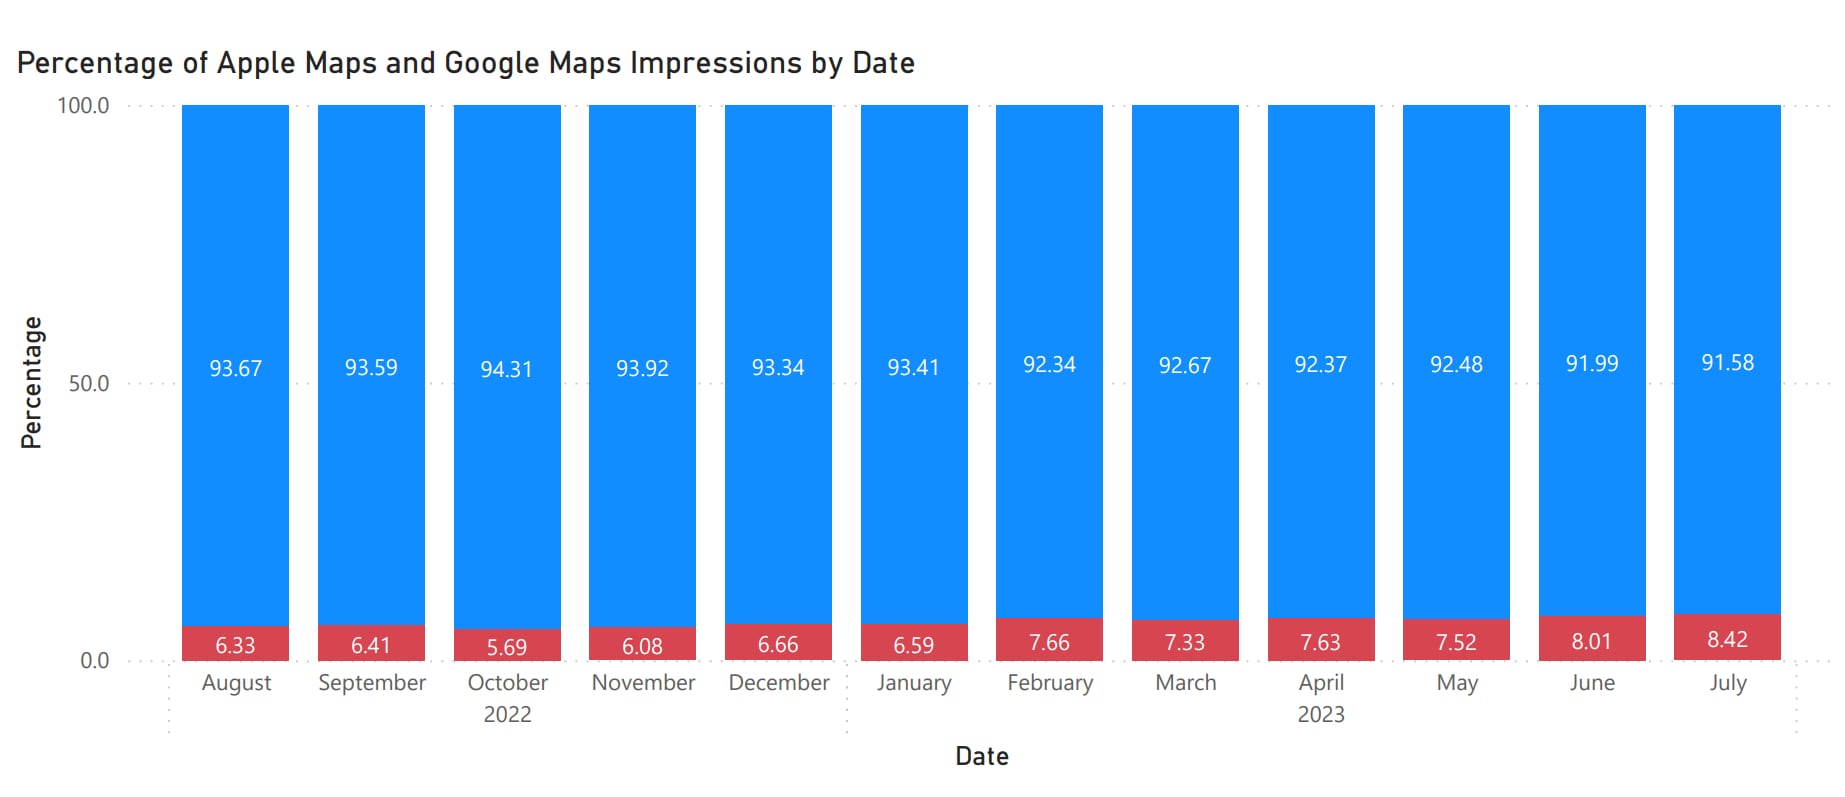 Percentage of Apple Maps and Google Maps Impressions by Date